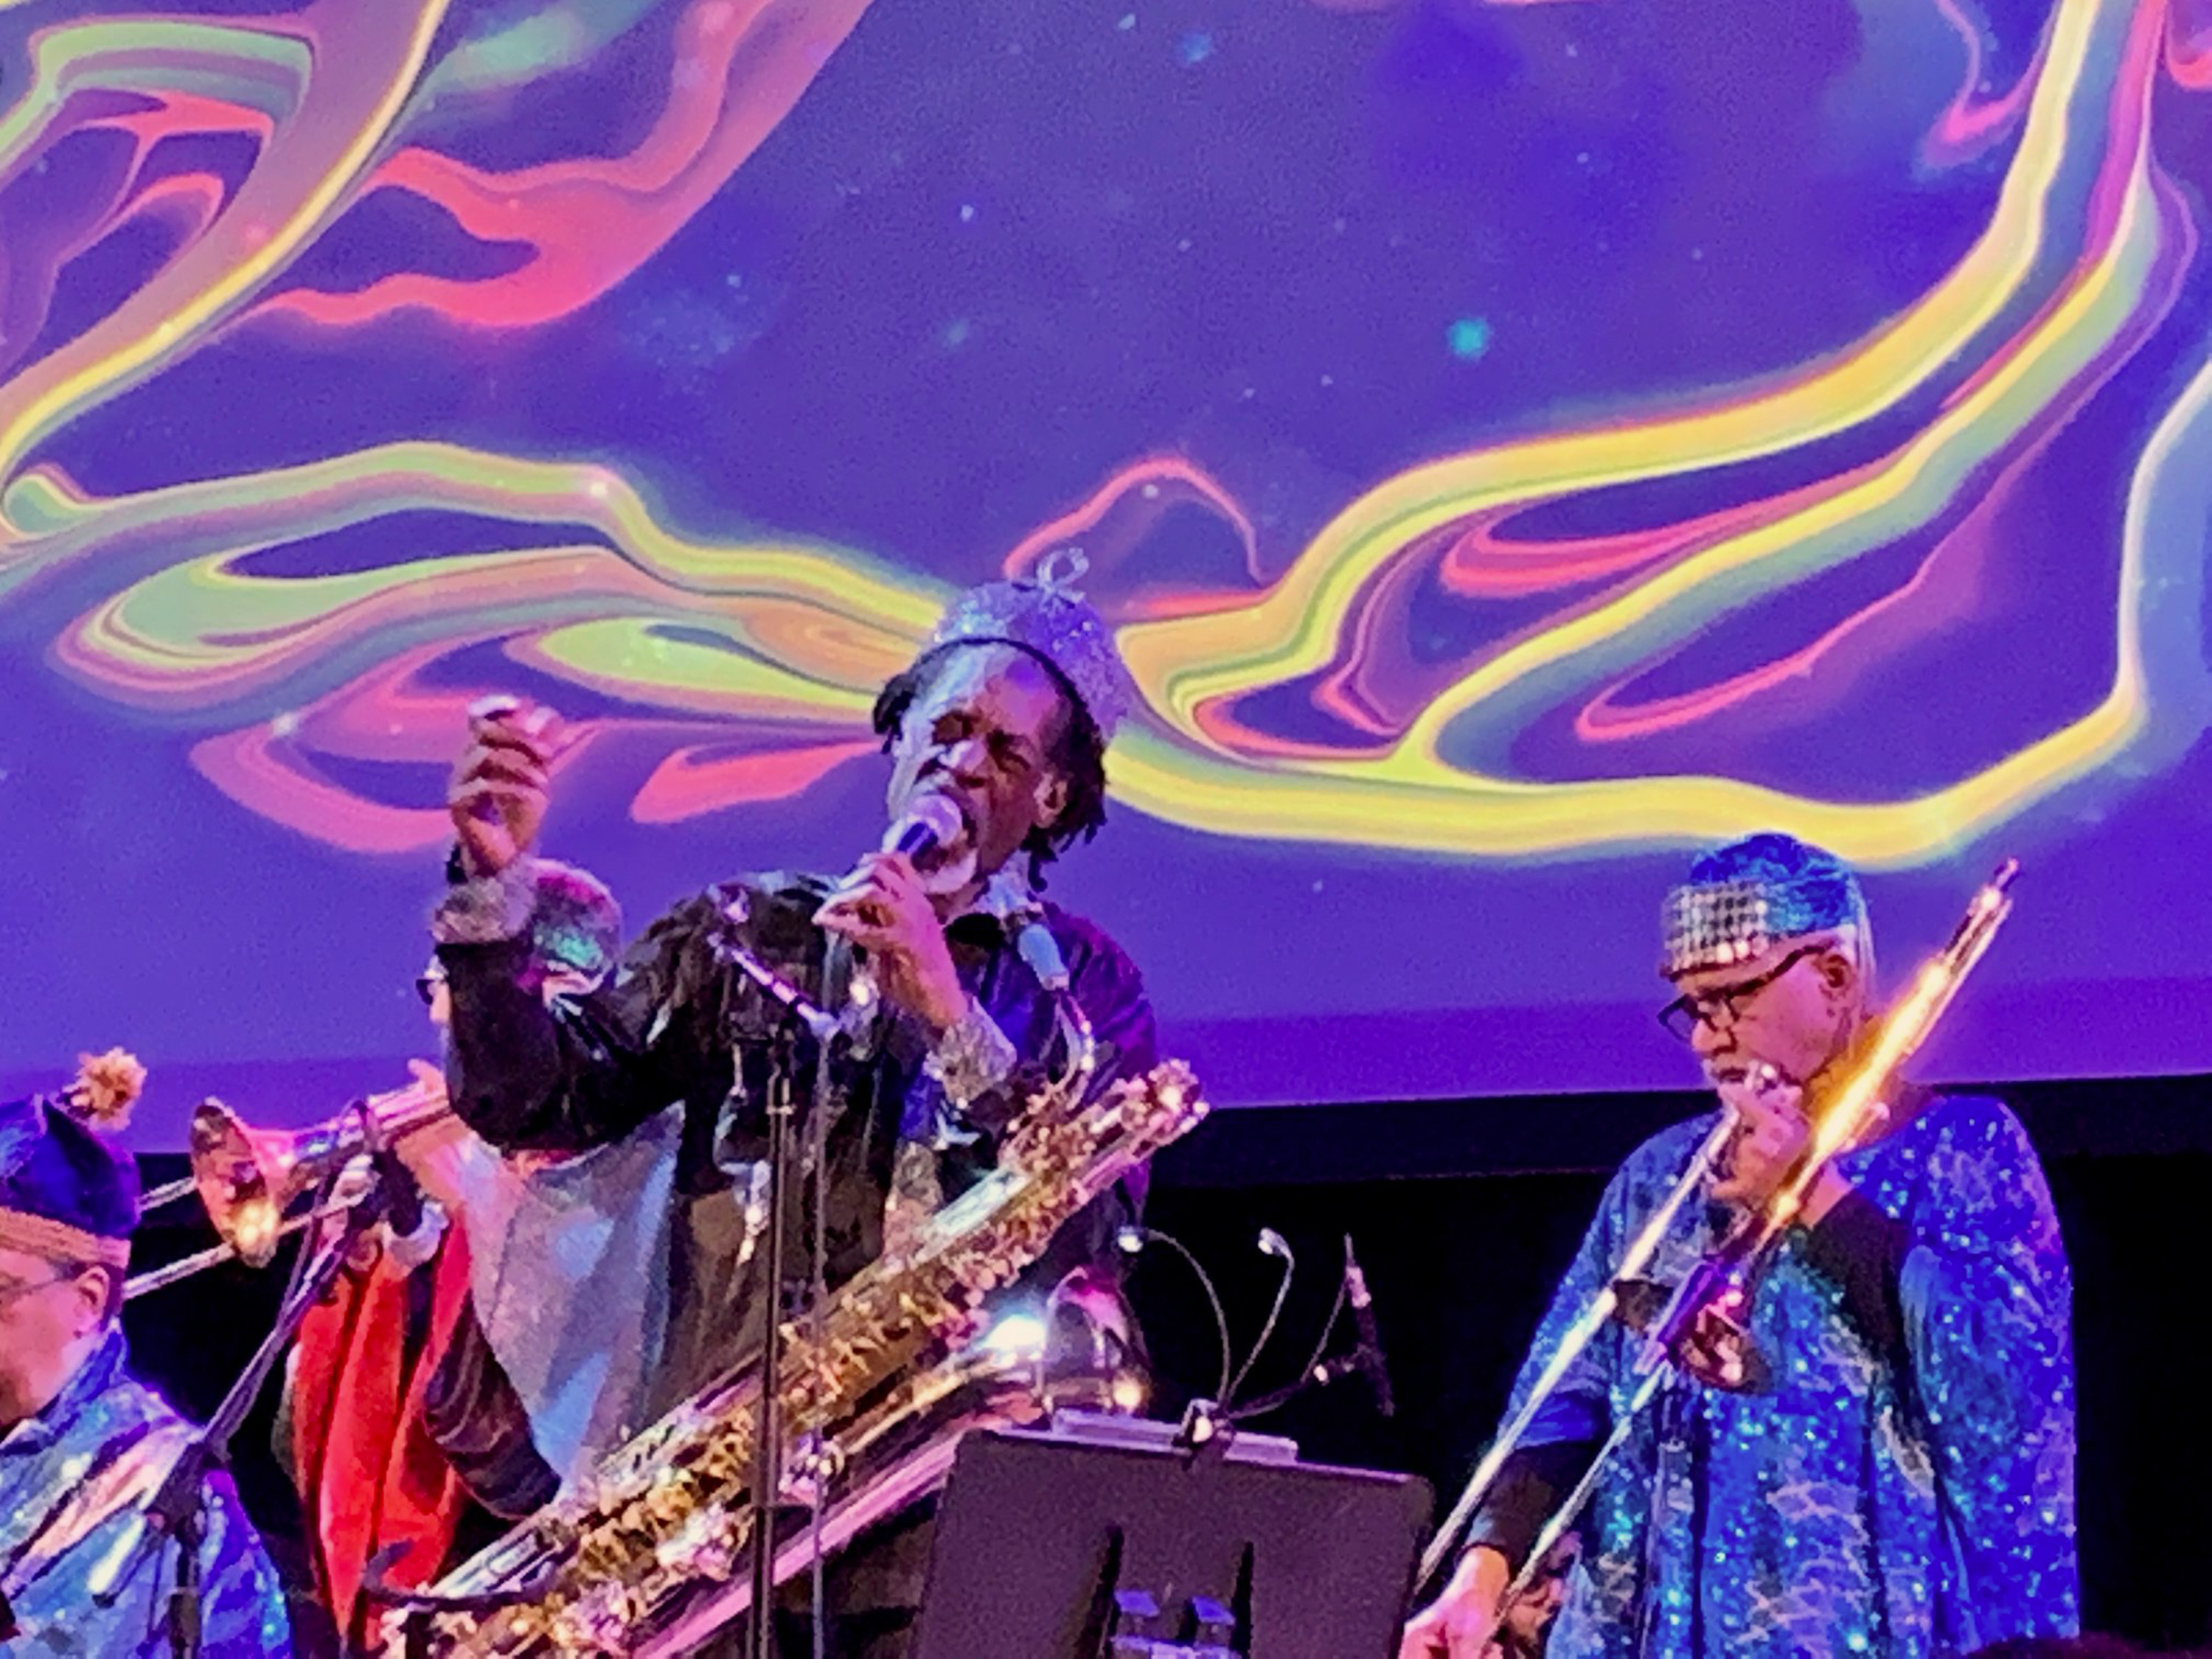 Sun Ra Arkestra with live painting photo by Bev Grant